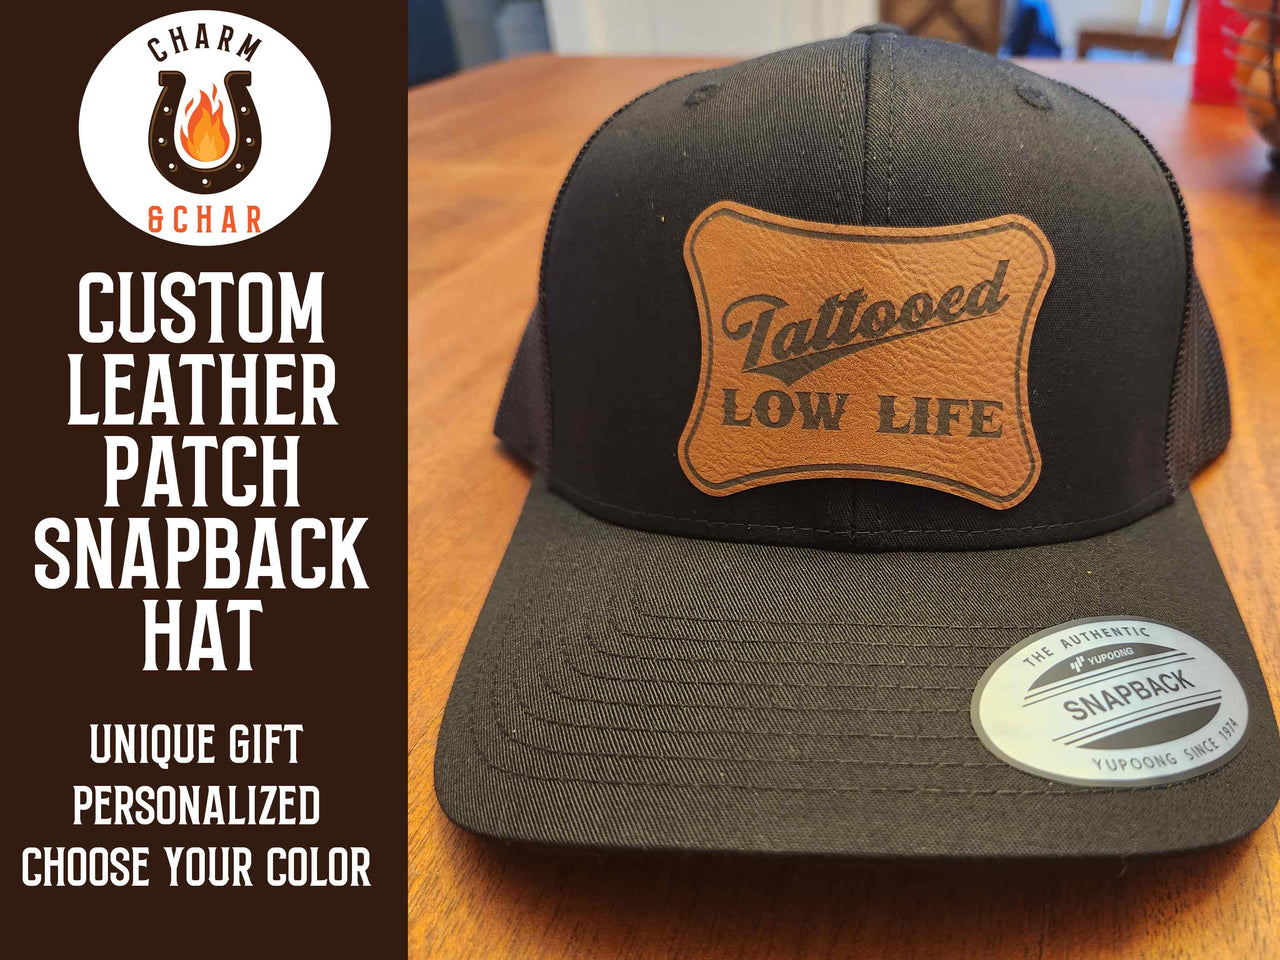 Tattooed Low Life Leather Patch Trucker Hats - Classic Colors